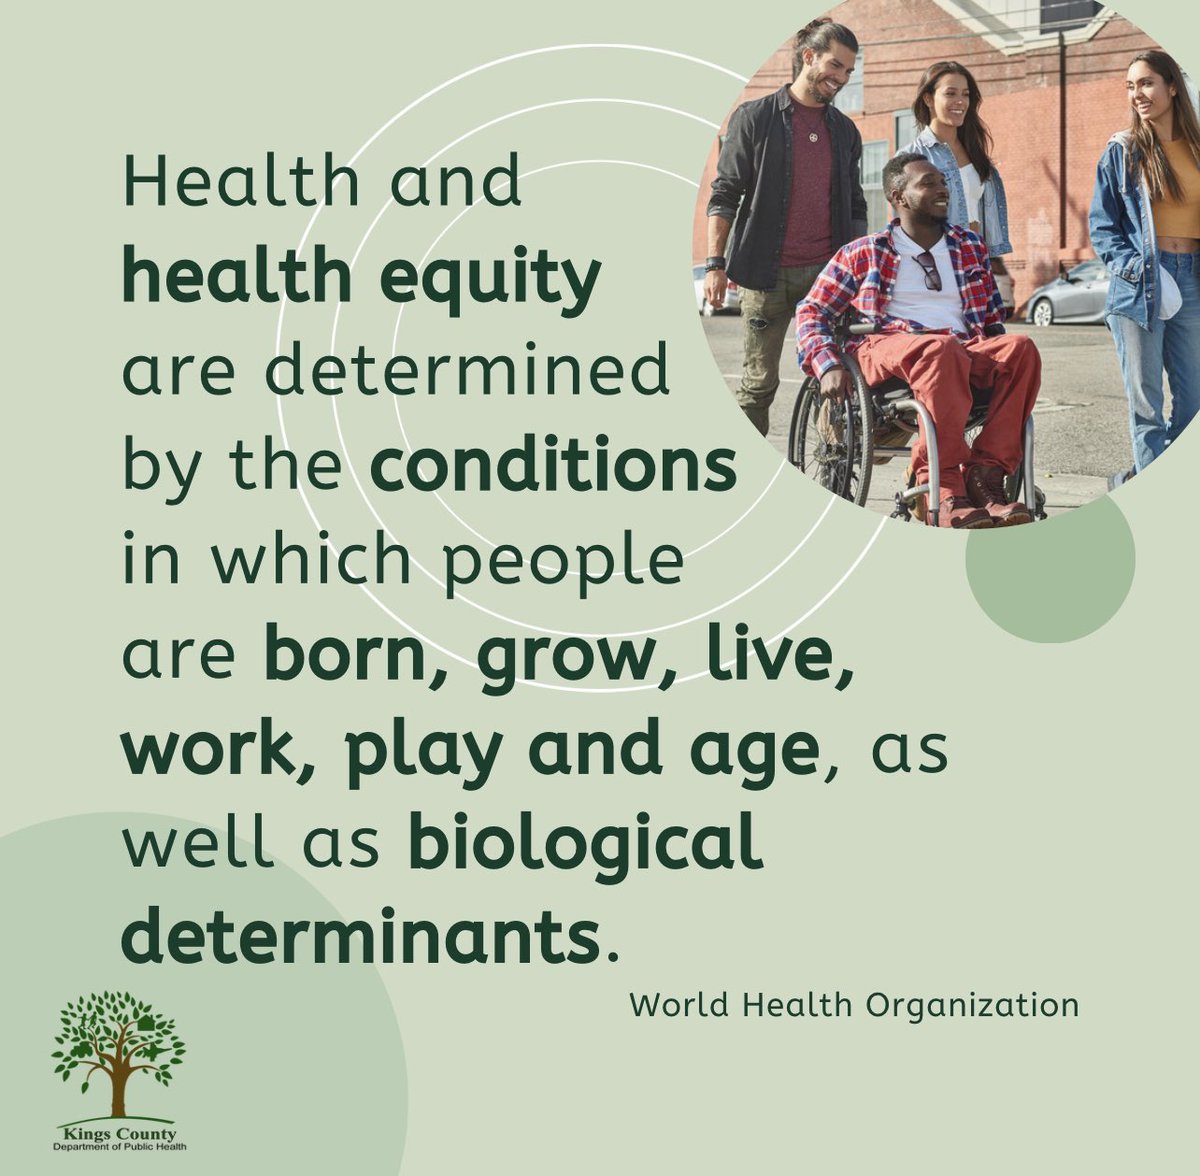 The Kings County Department of Public Health is committed to working collaboratively with community members and partners to identify and eliminate health disparities in order to achieve the optimal health outcomes for Kings County residents.